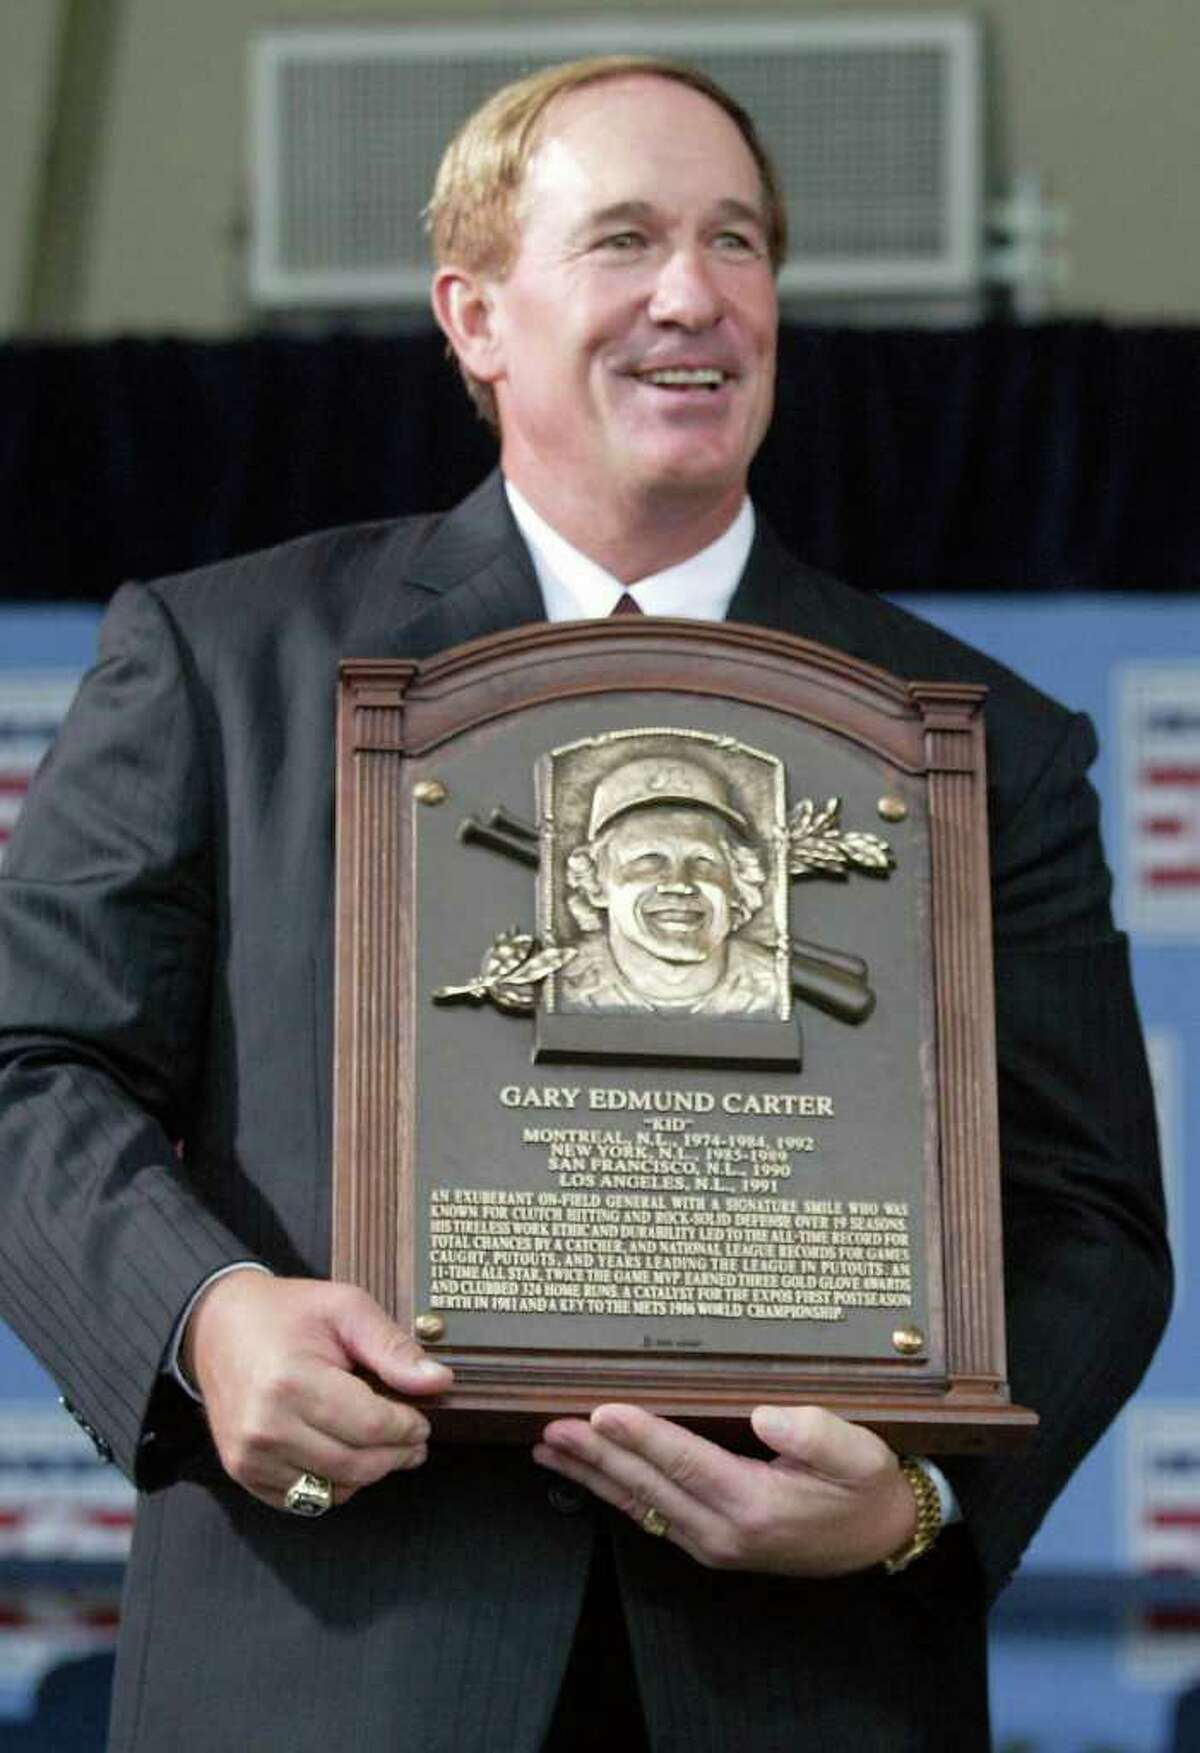 FILE - In this July 27, 2003, file photo, National Baseball Hall of Fame Inductees Gary Carter holds his plaque during induction ceremonies in Cooperstown, N.Y. Baseball Hall of Fame president Jeff Idelson said Thursday, Feb. 16, 2012, that Hall of Fame catcher Gary Carter has died. He was 57.(AP Photo/John Dunn, File)